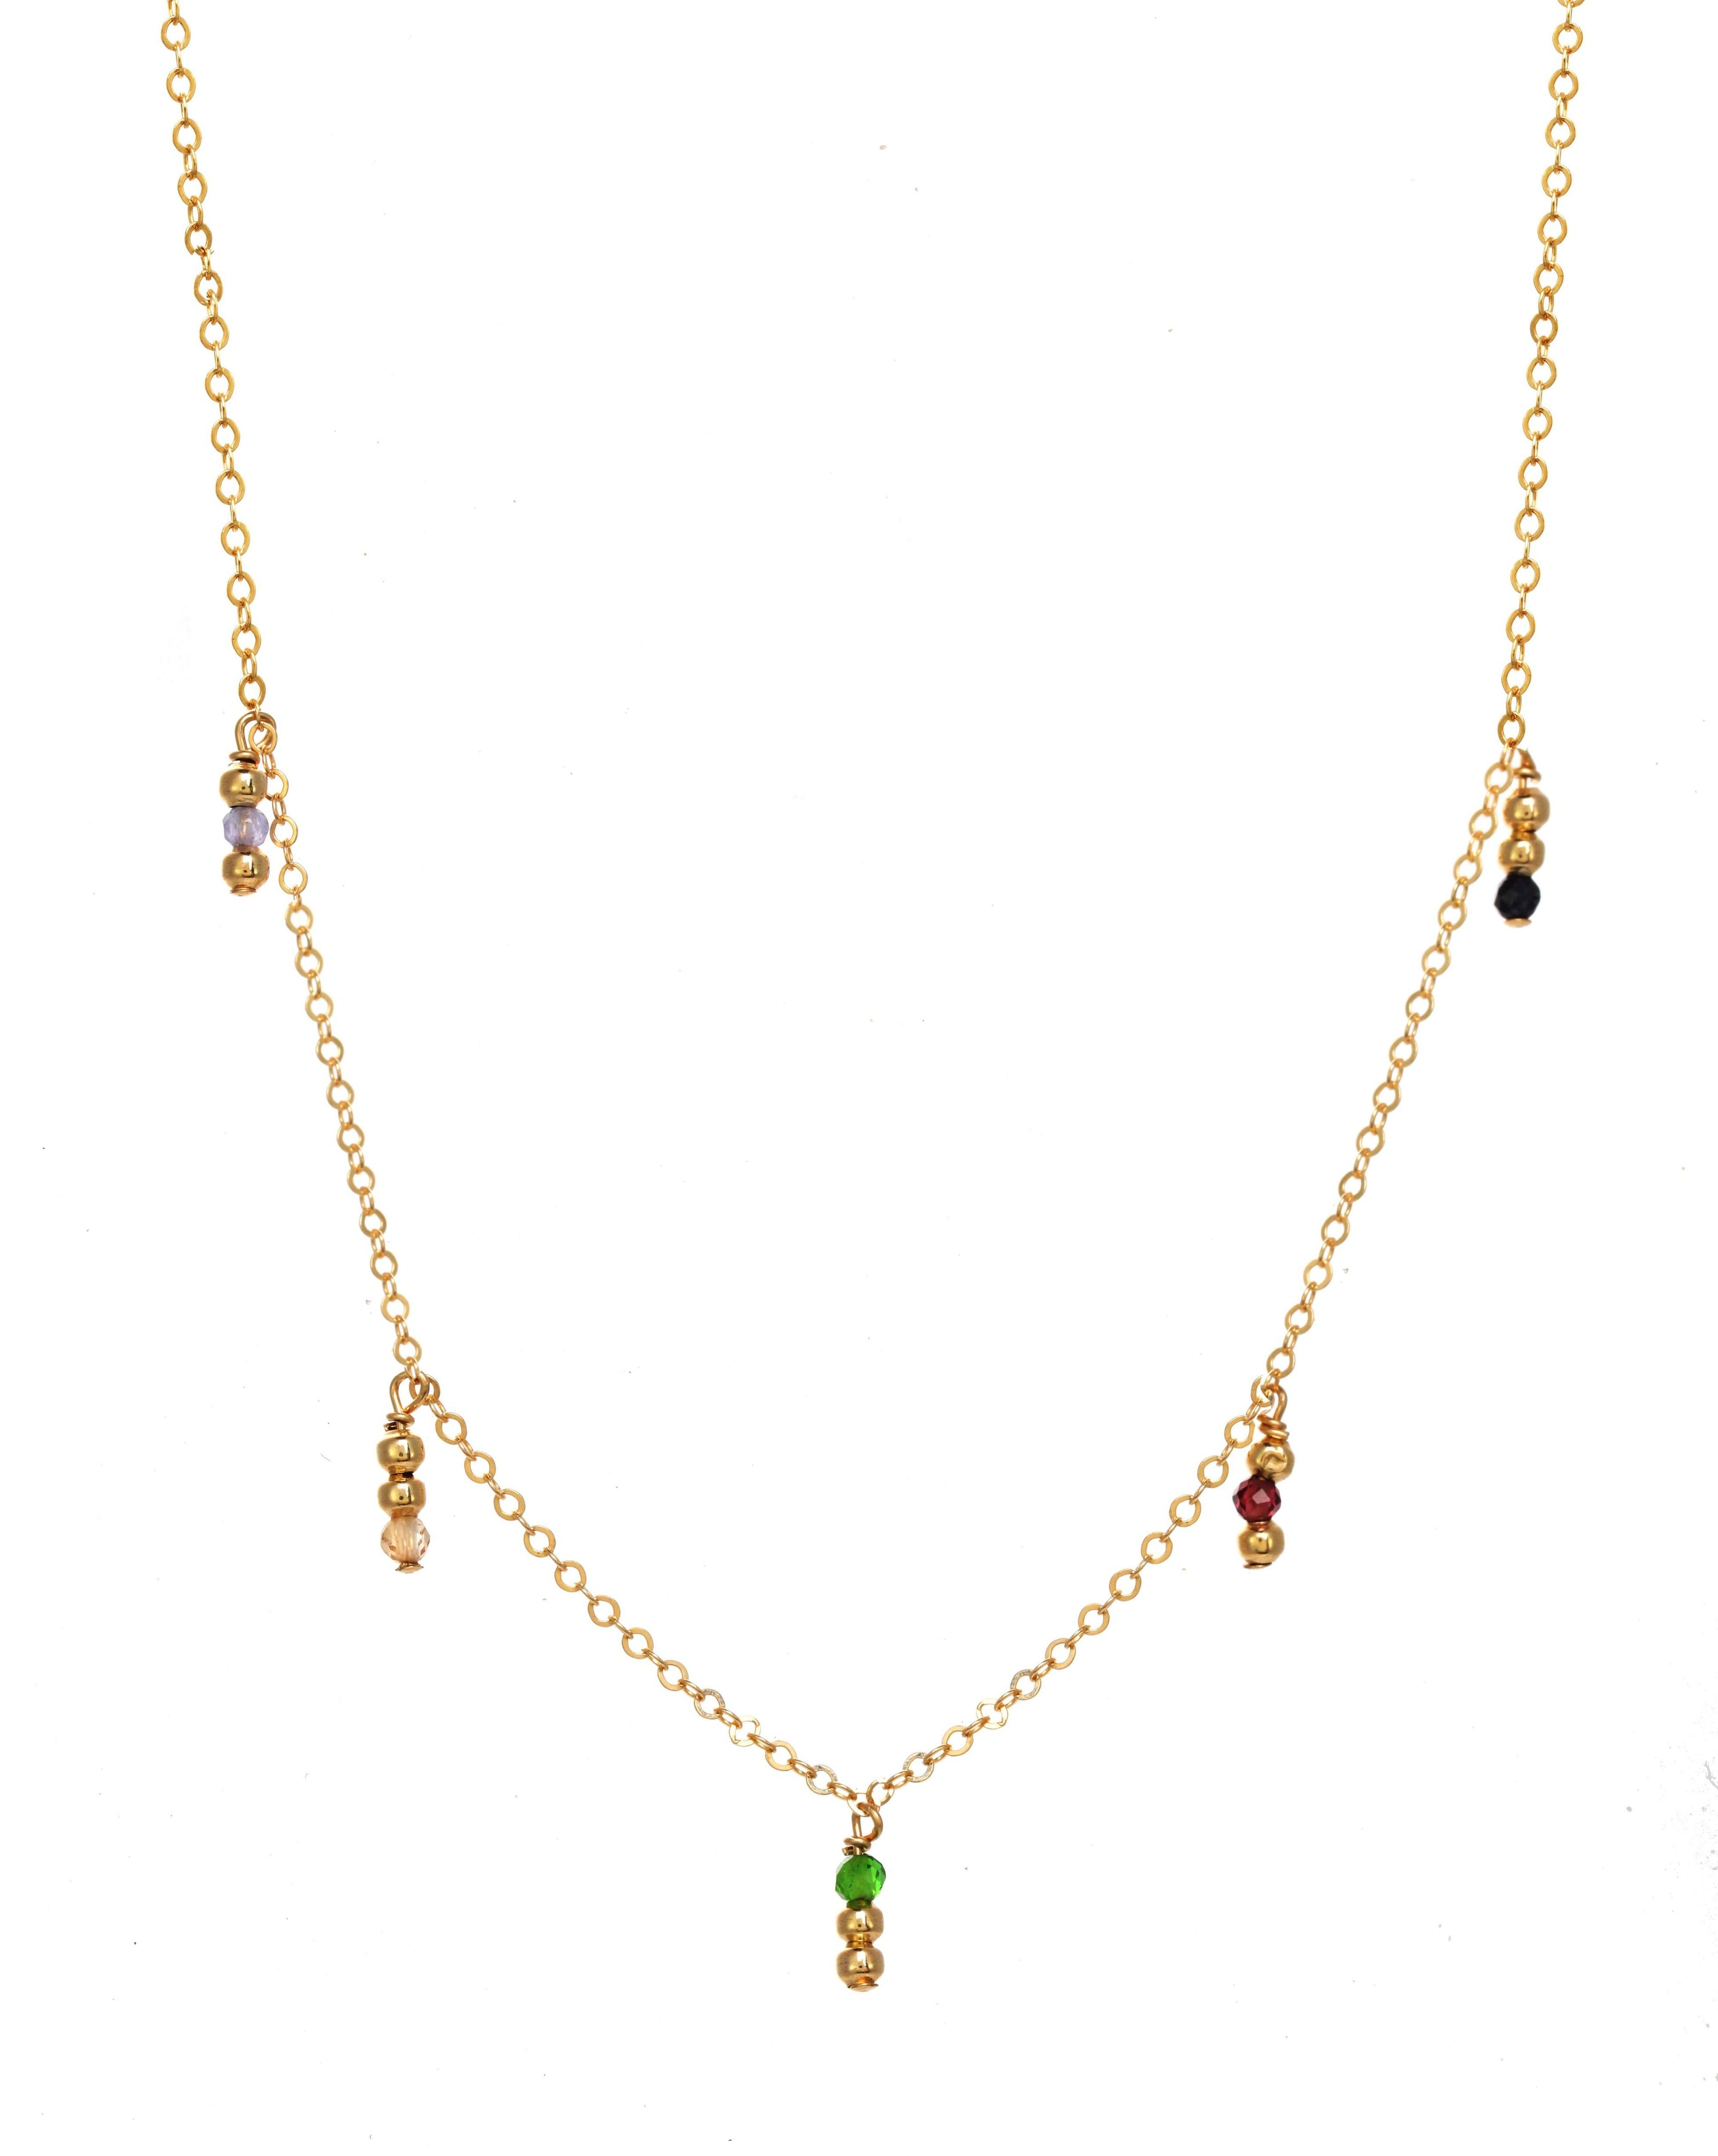 Saga Necklace by KOZAKH. A 16 to 18 inch adjustable length necklace, crafted in 14K Gold Filled, featuring 2mm Seamless round beads and 2mm Faceted round Emerald, Garnet, Sapphire, Tanzanite and Topaz.